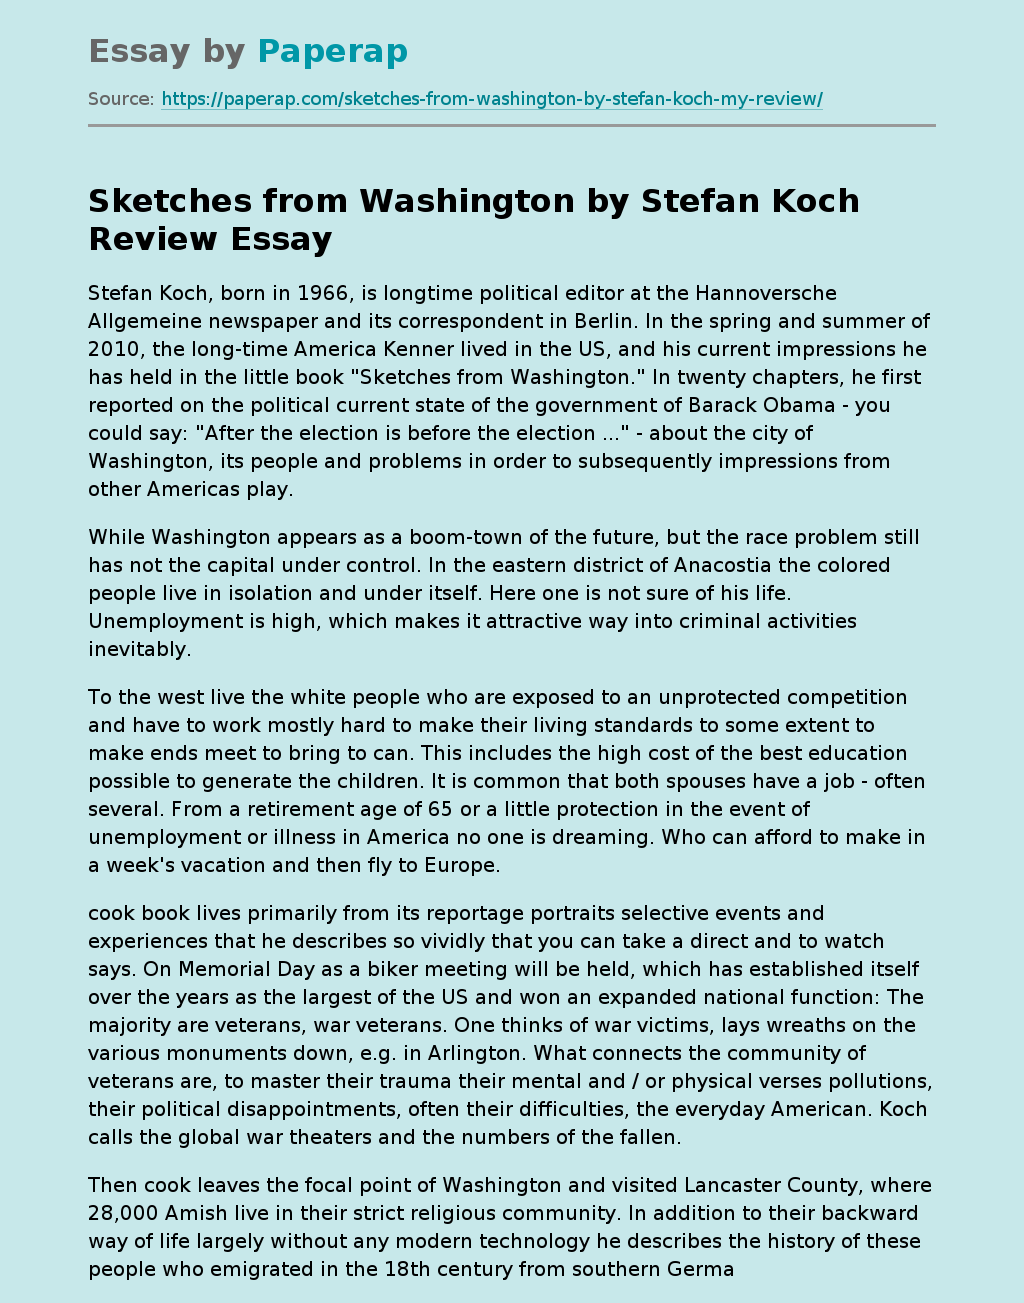 Sketches from Washington by Stefan Koch Review